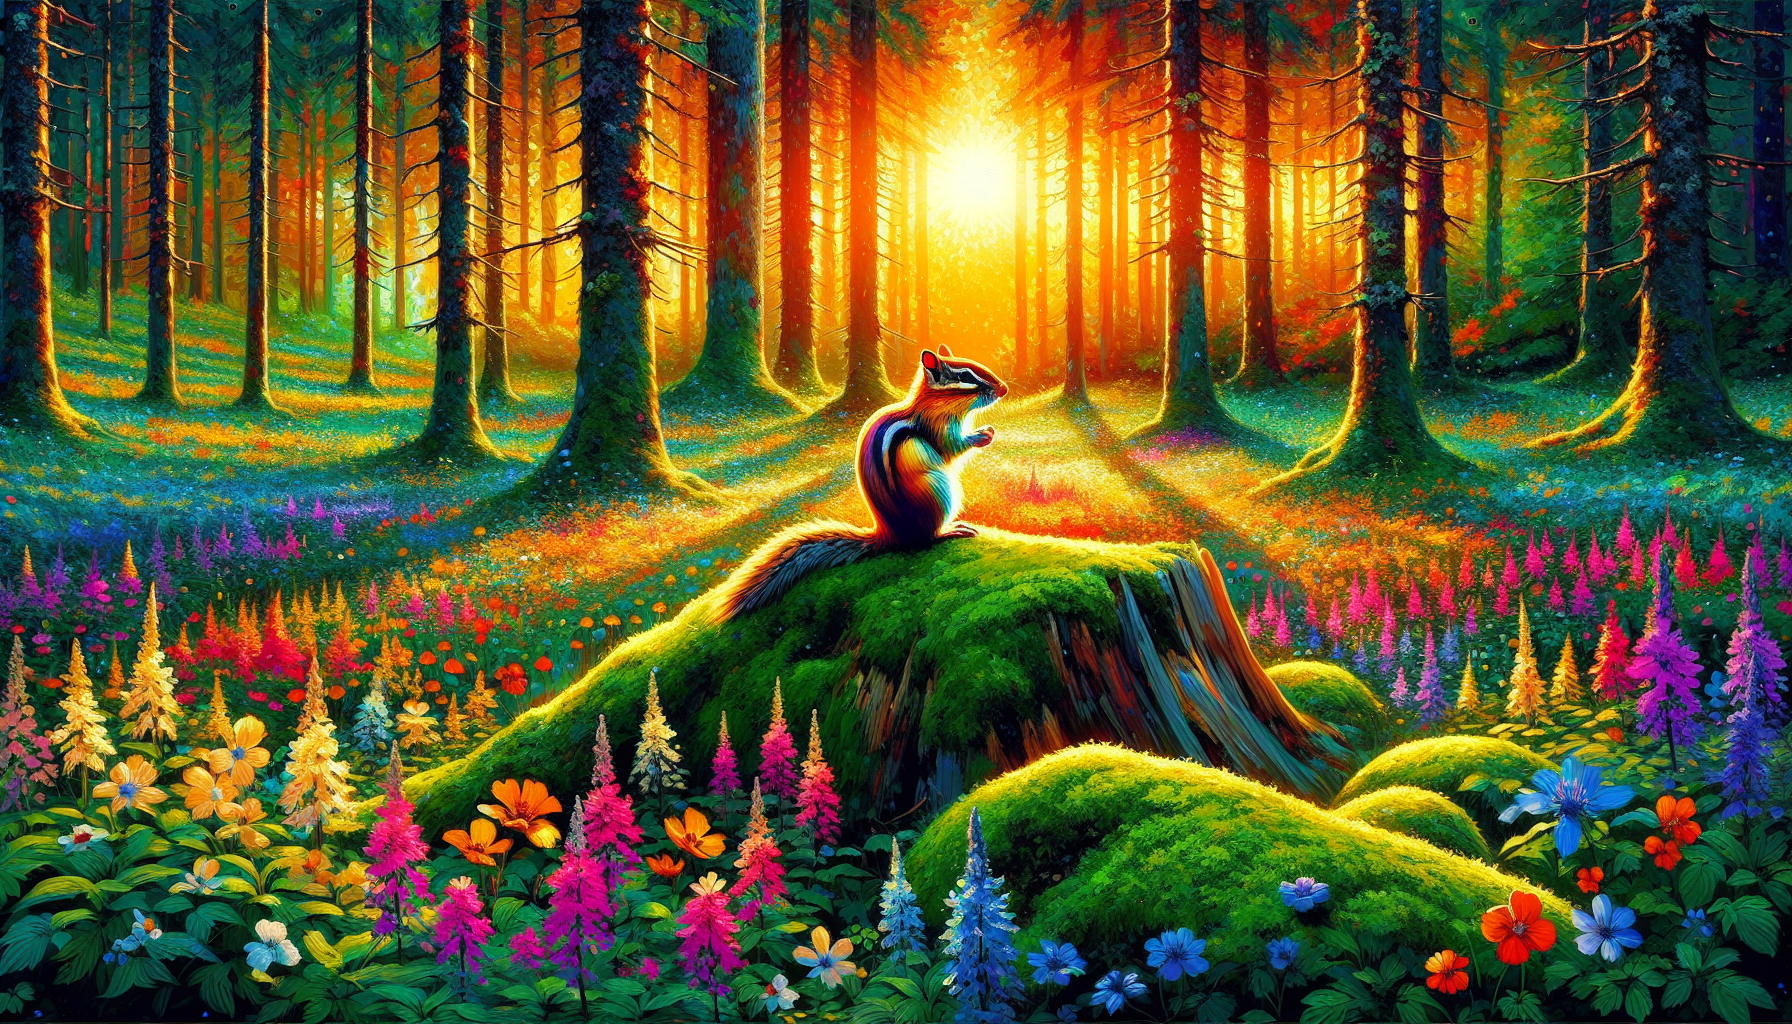 An enchanting forest glade with a wise old chipmunk perched atop a moss-covered stone, surrounded by vibrant wildflowers, under the soft, shimmering light of a setting sun, symbolizing curiosity and p